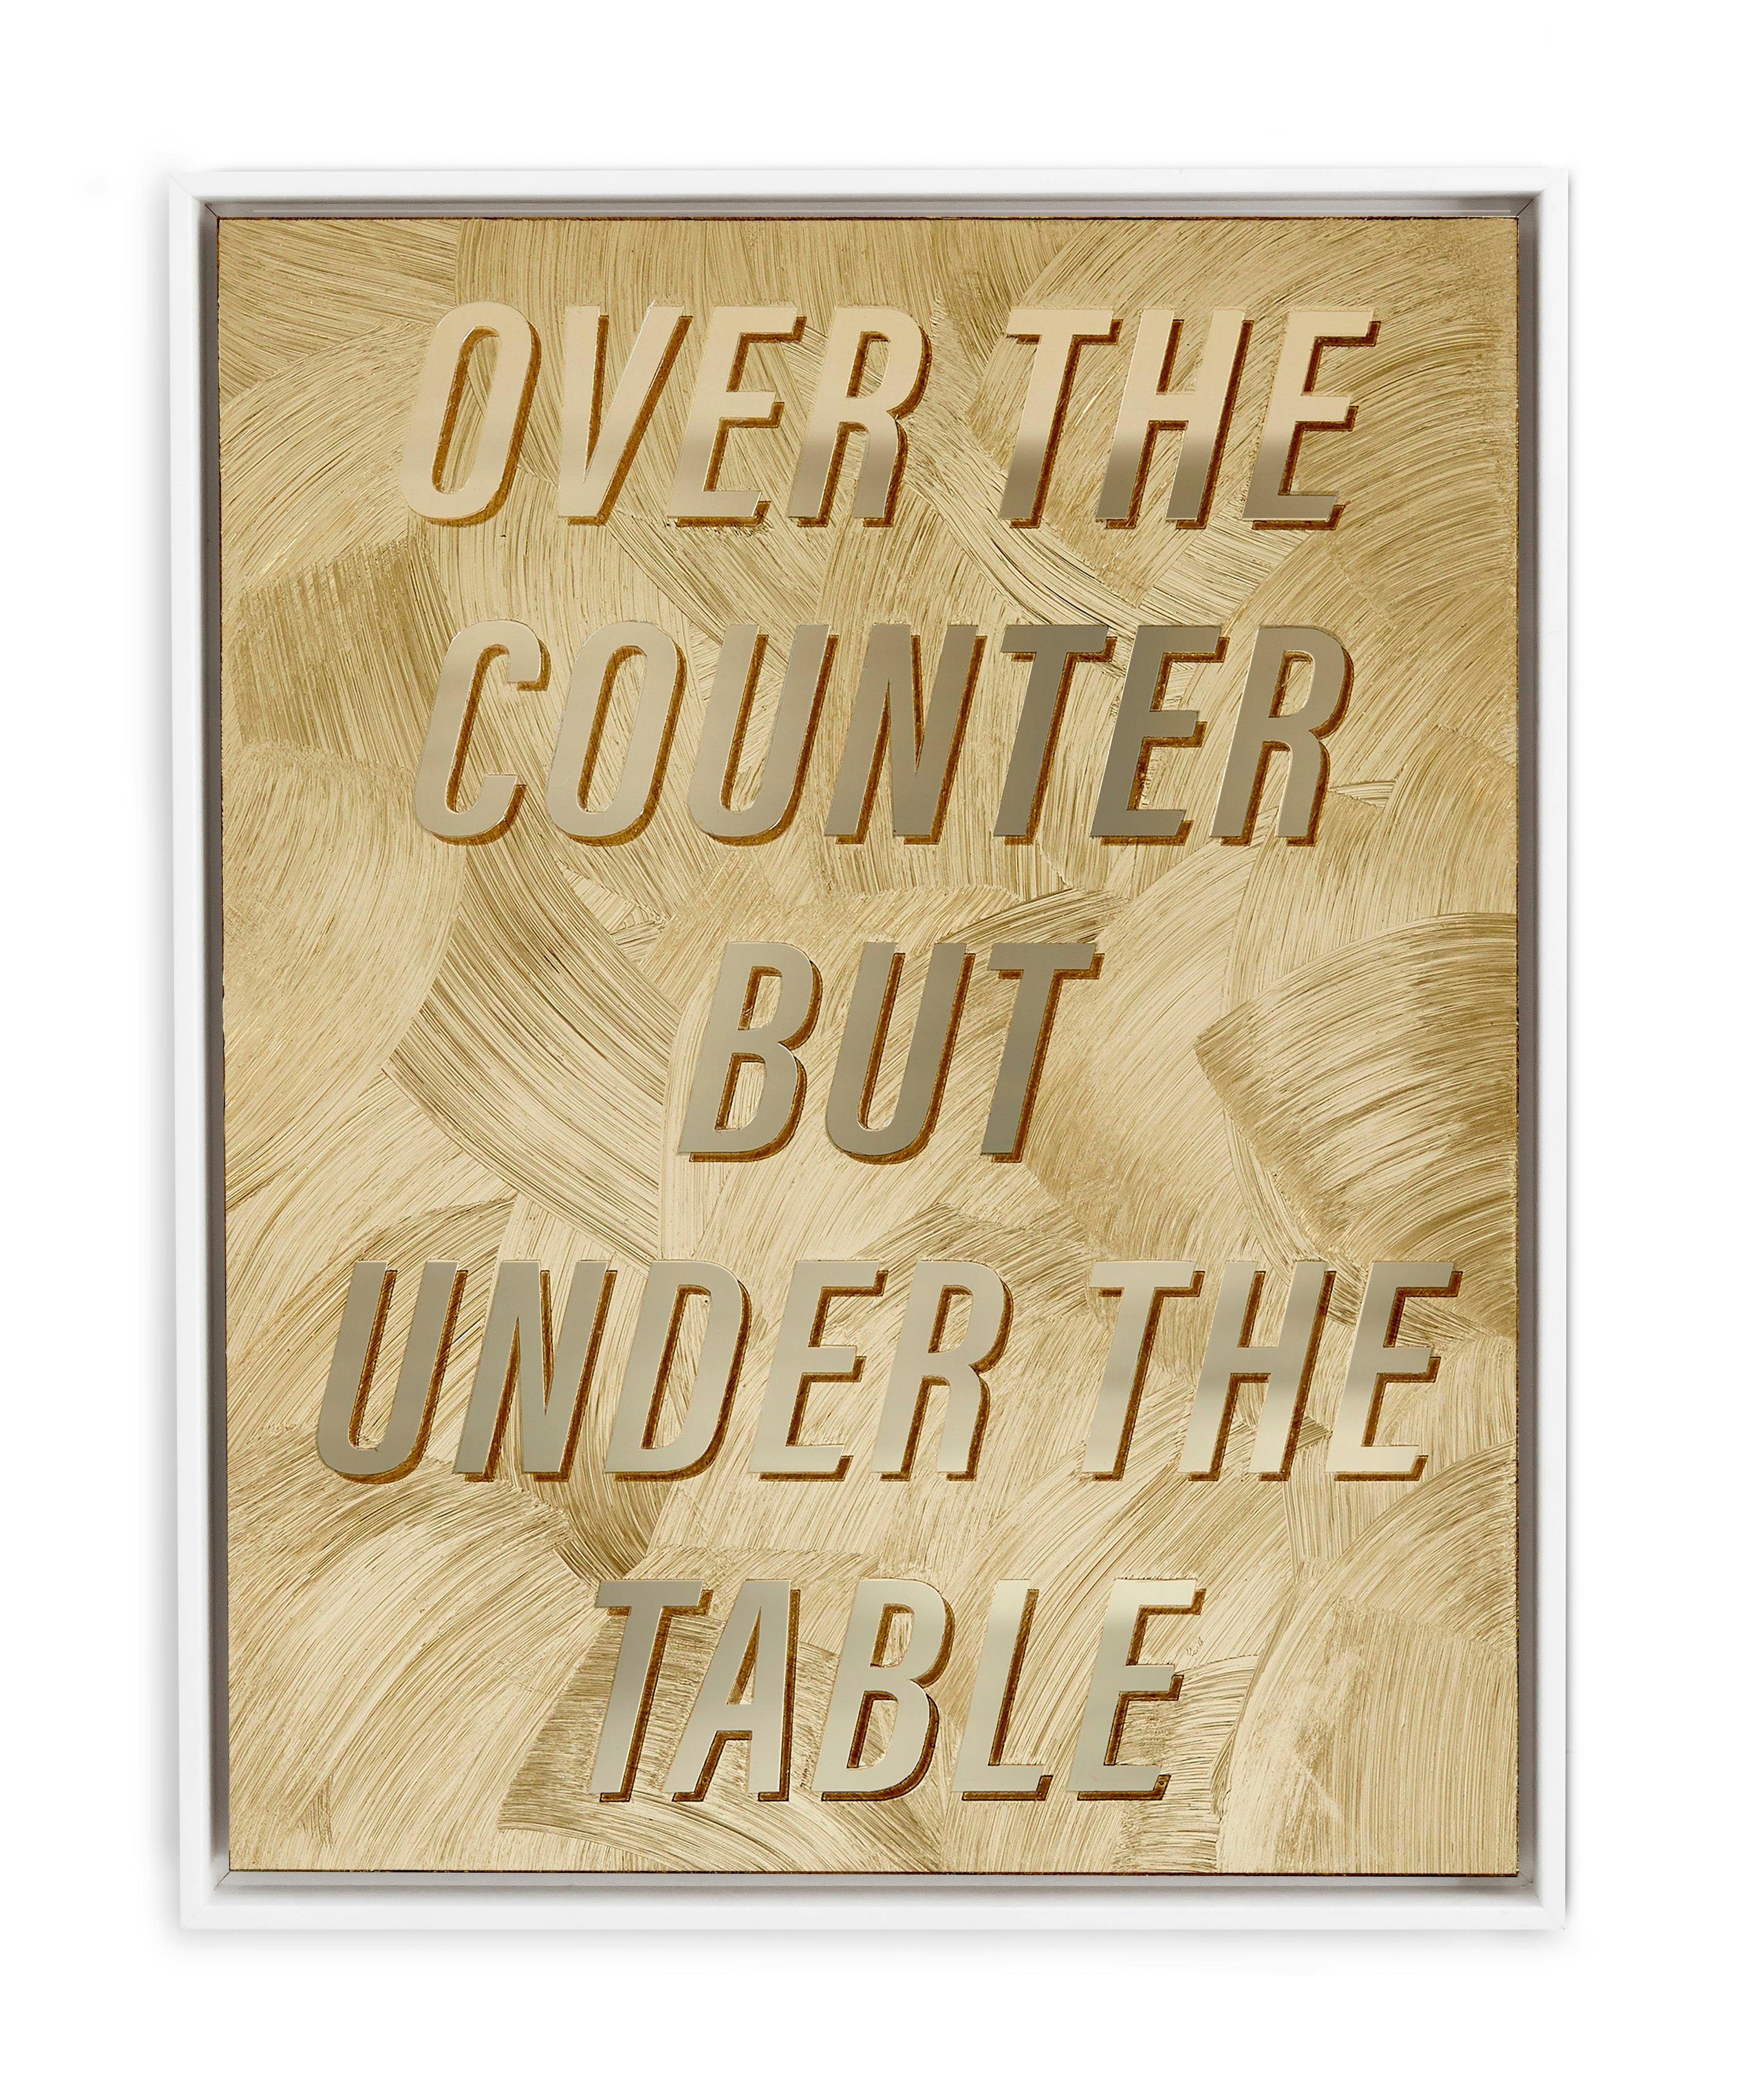 Mixed Media by Ben Skinner titled "Over The Counter".